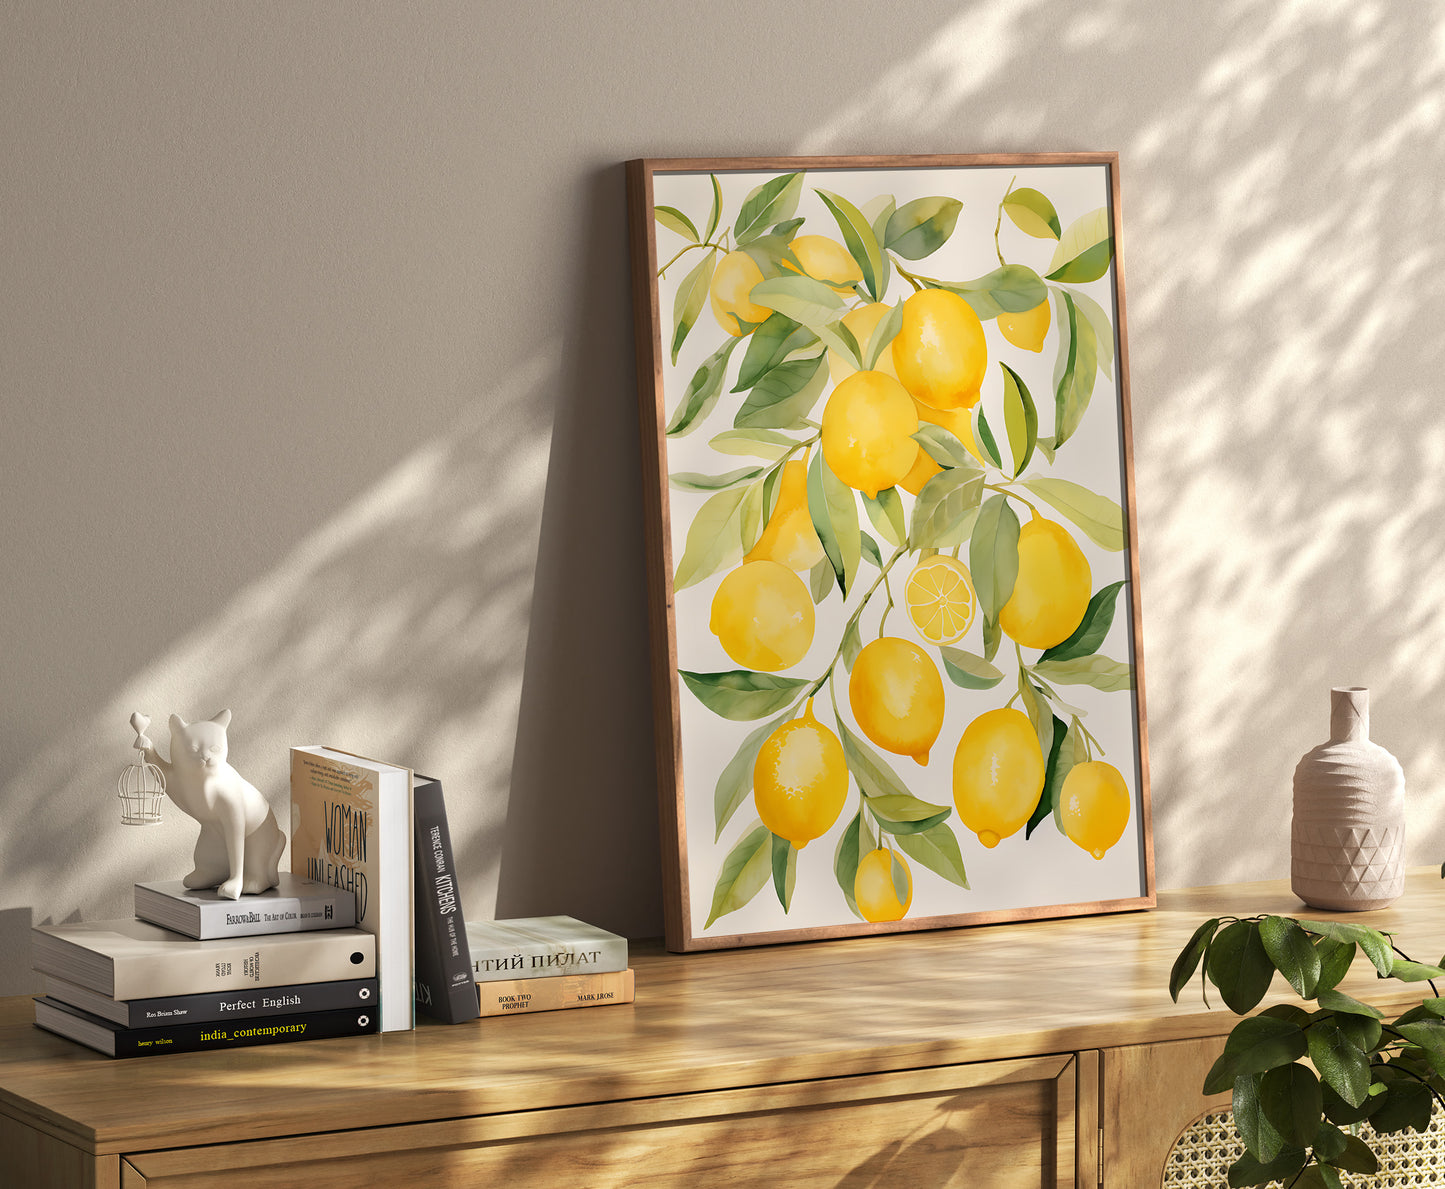 A framed painting of lemons on a wall above a sideboard decorated with books and vases.